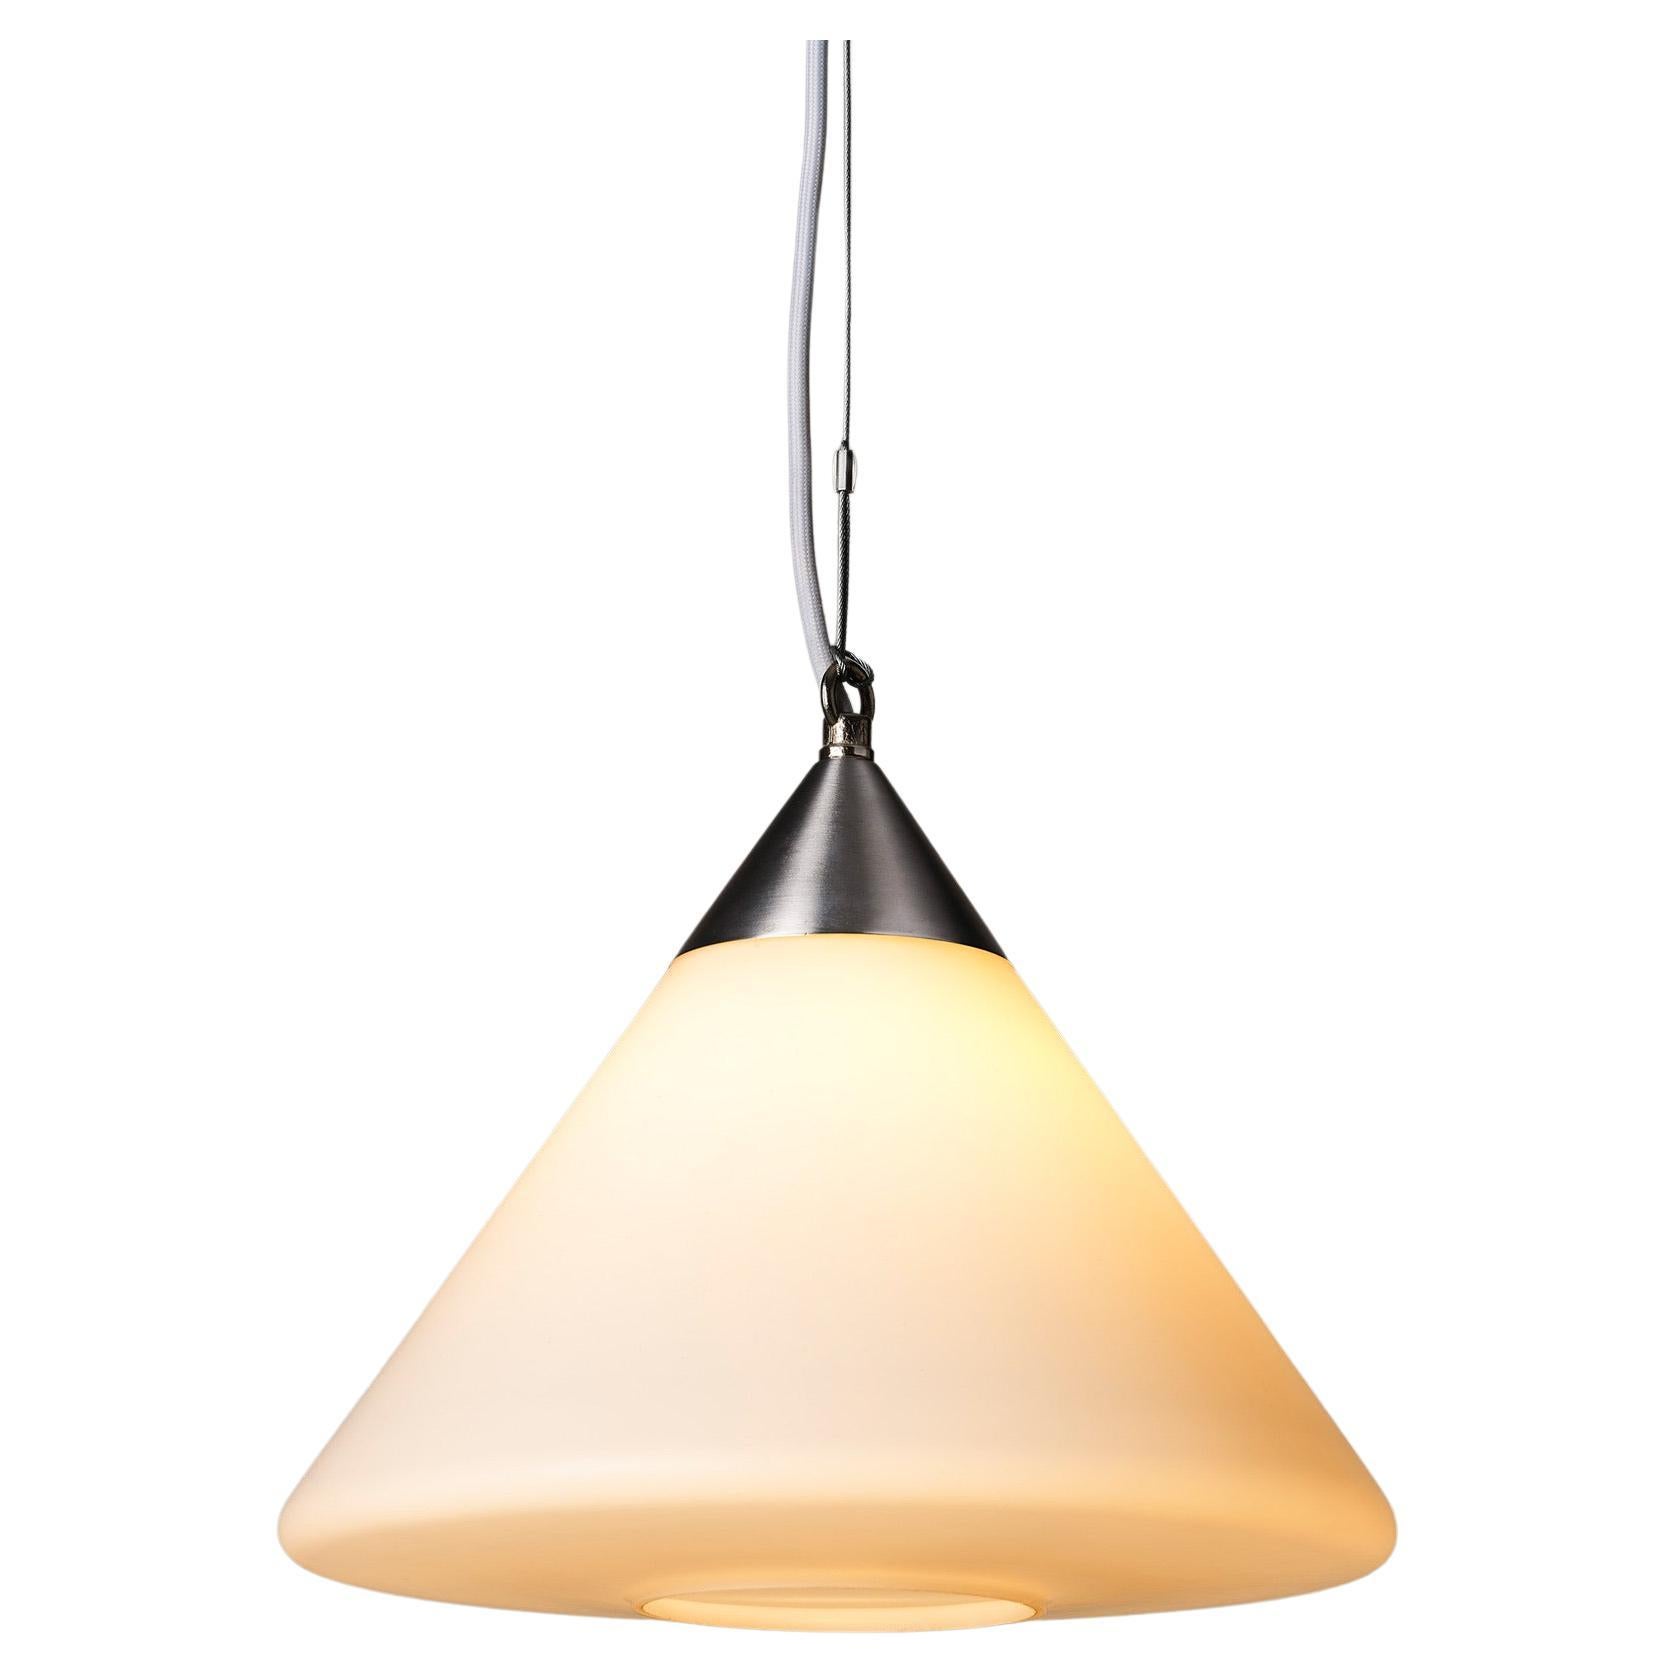 Vintage Conical Glass Pendant Light - Small For Sale